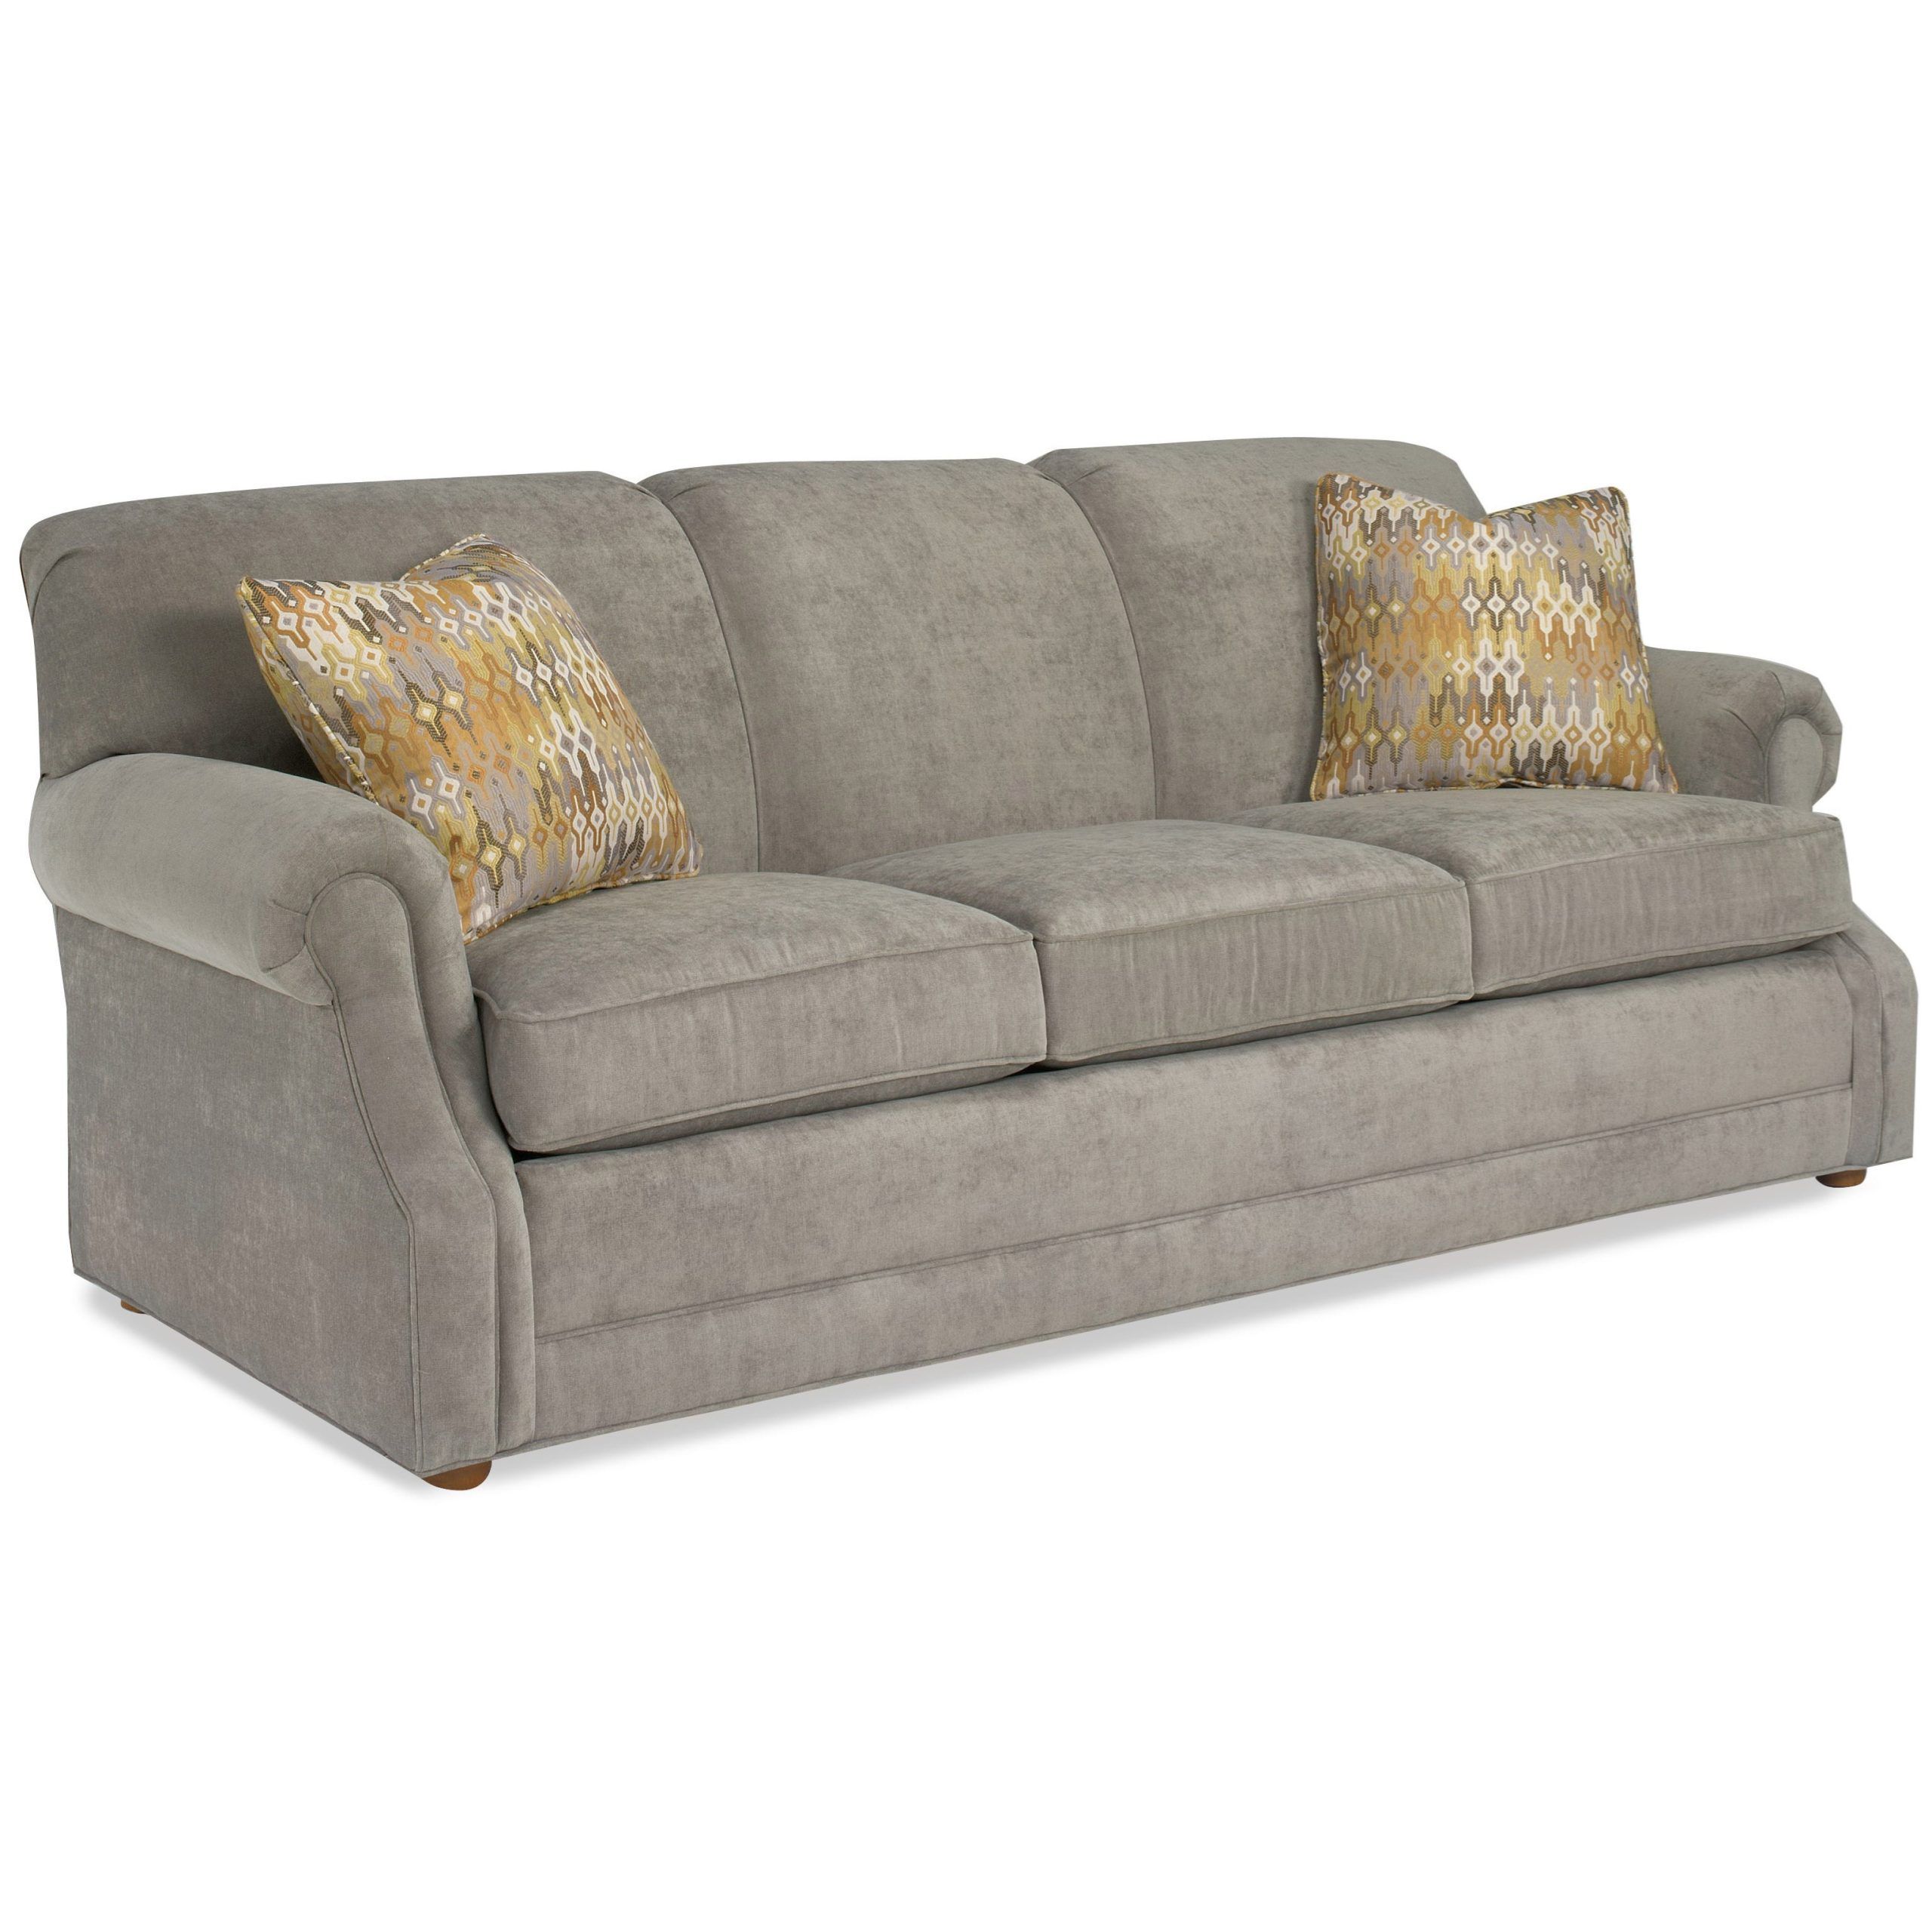 Temple Furniture Tailor Made 6630 85 Casual Sofa With Attached Back Pertaining To Sofas With Pillowback Wood Bases (View 3 of 20)